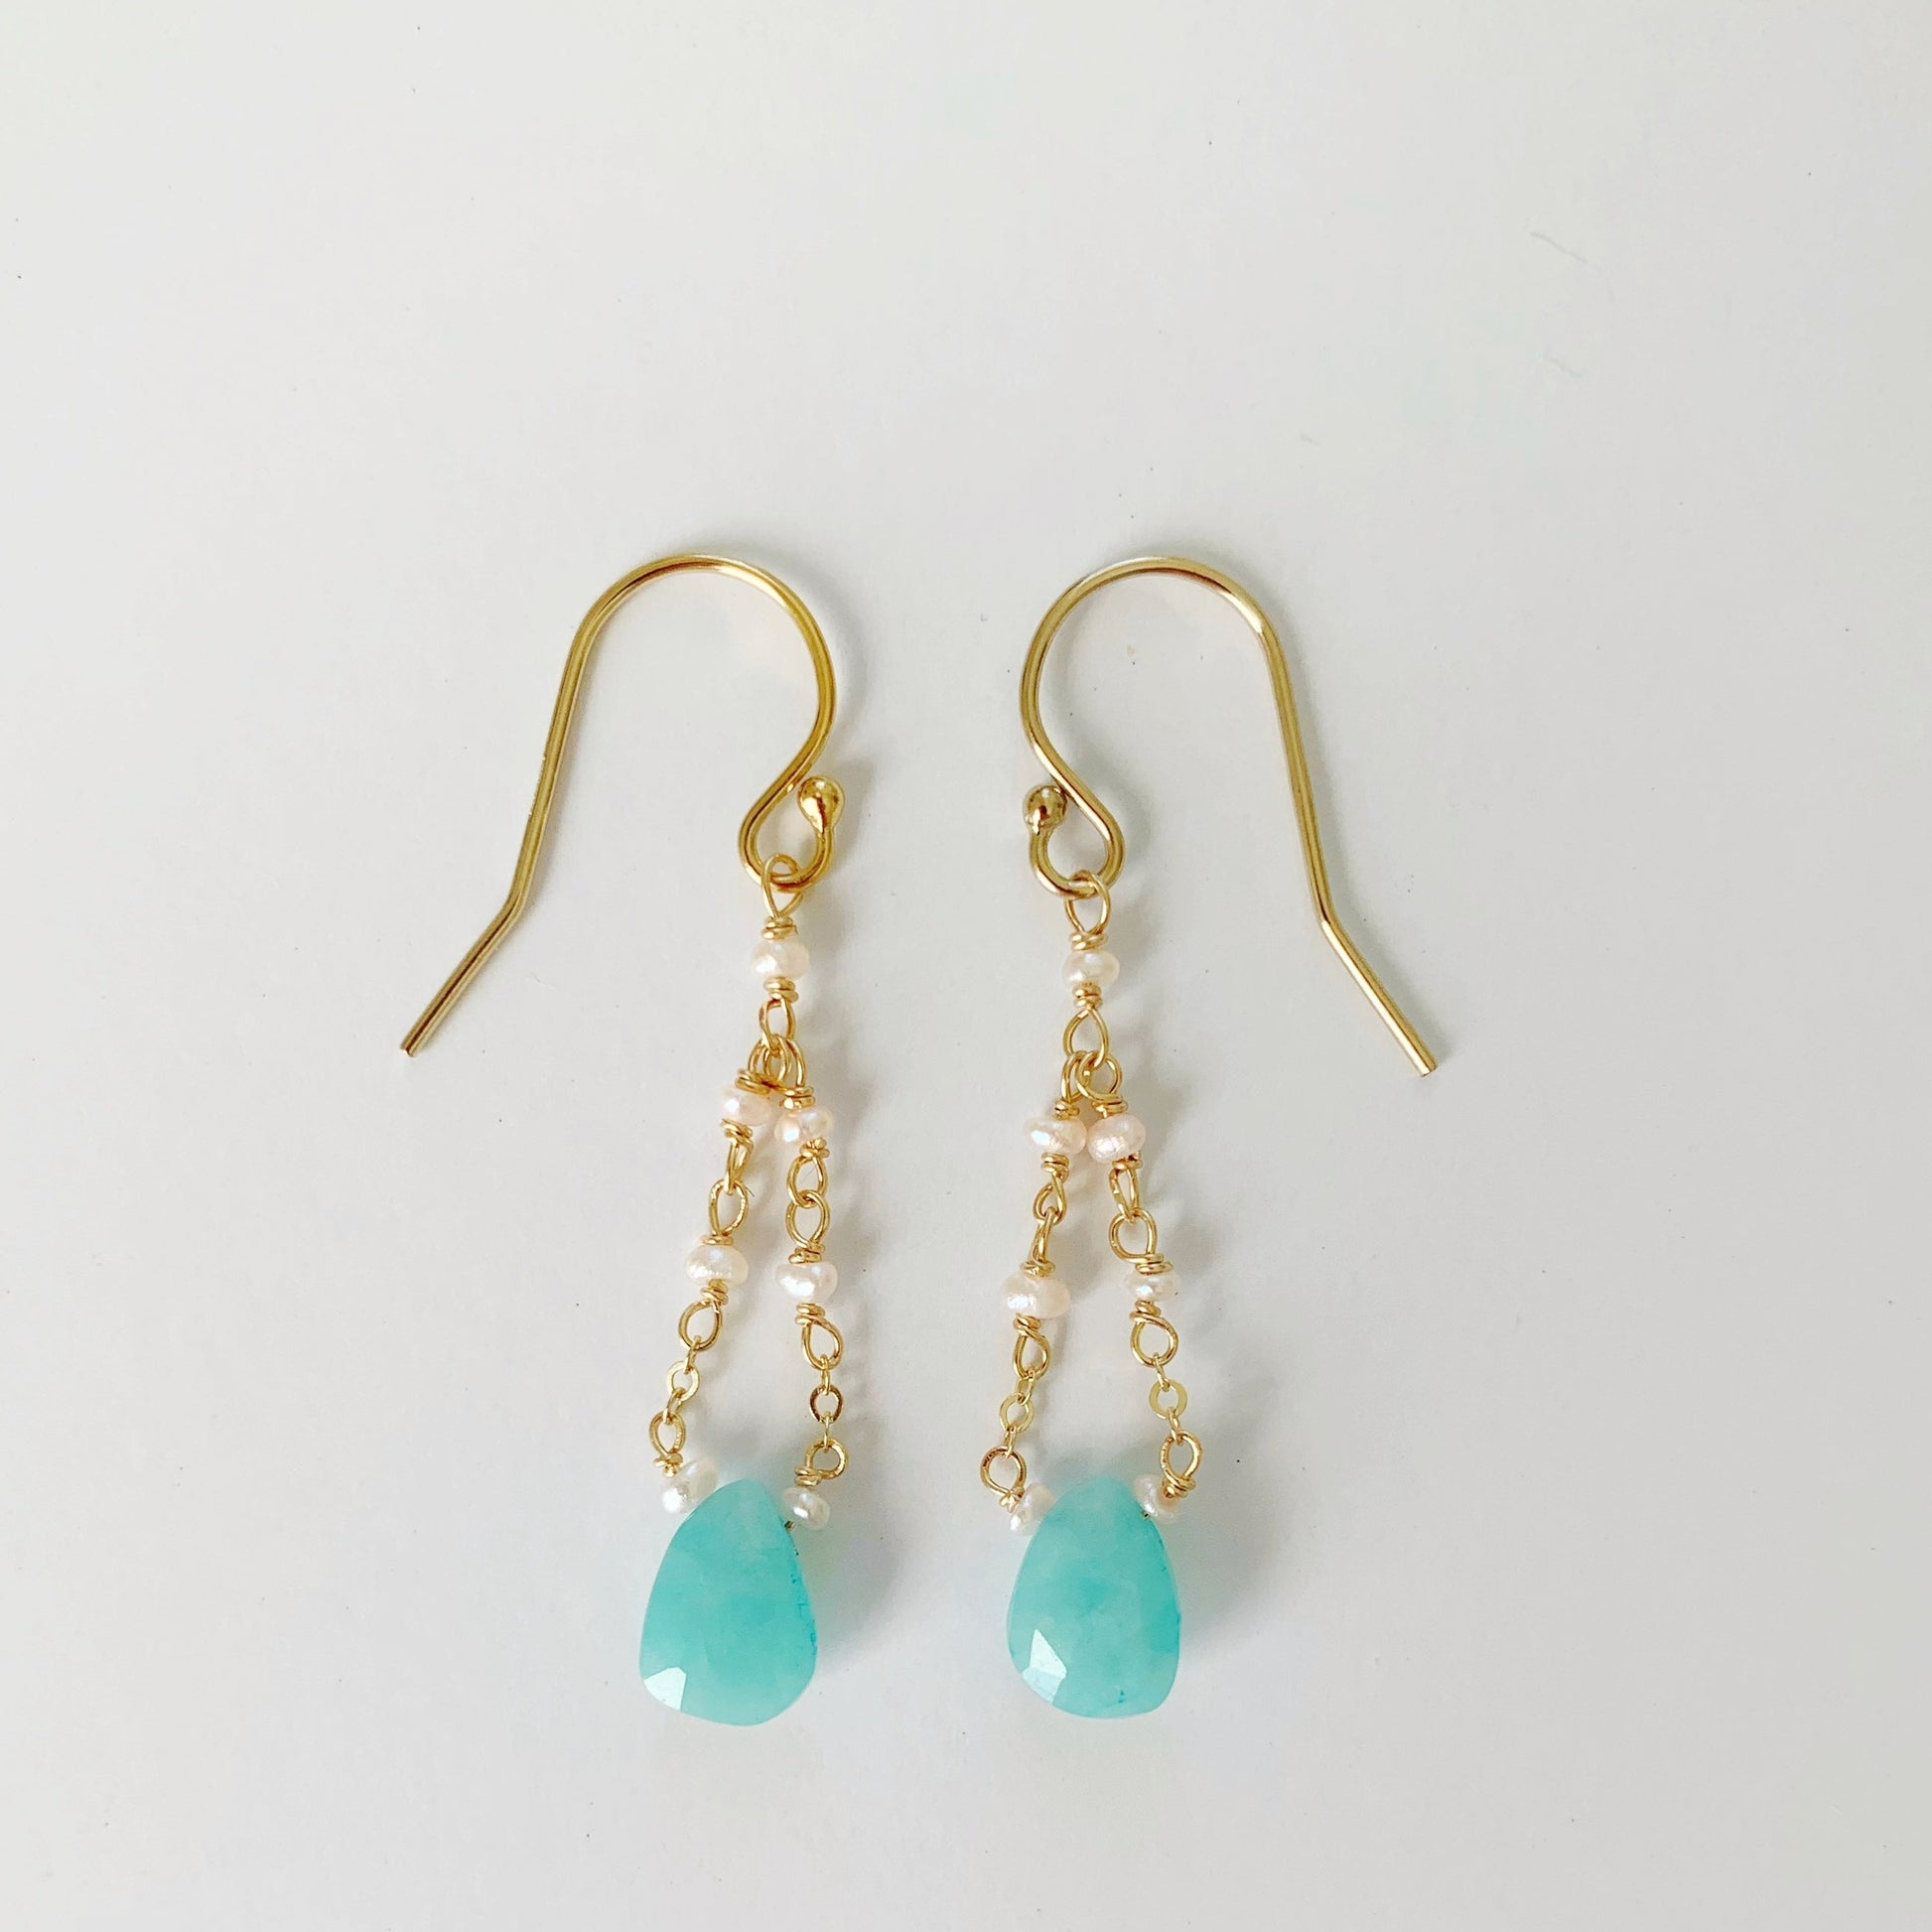 the island air earrings by mermaids and madeleines are created with amazonite teardrop shape stones at the bottom of the earring with a mix of 14k gold filled chain and pearls looping to the earring hook. this pair is photographed on a white background